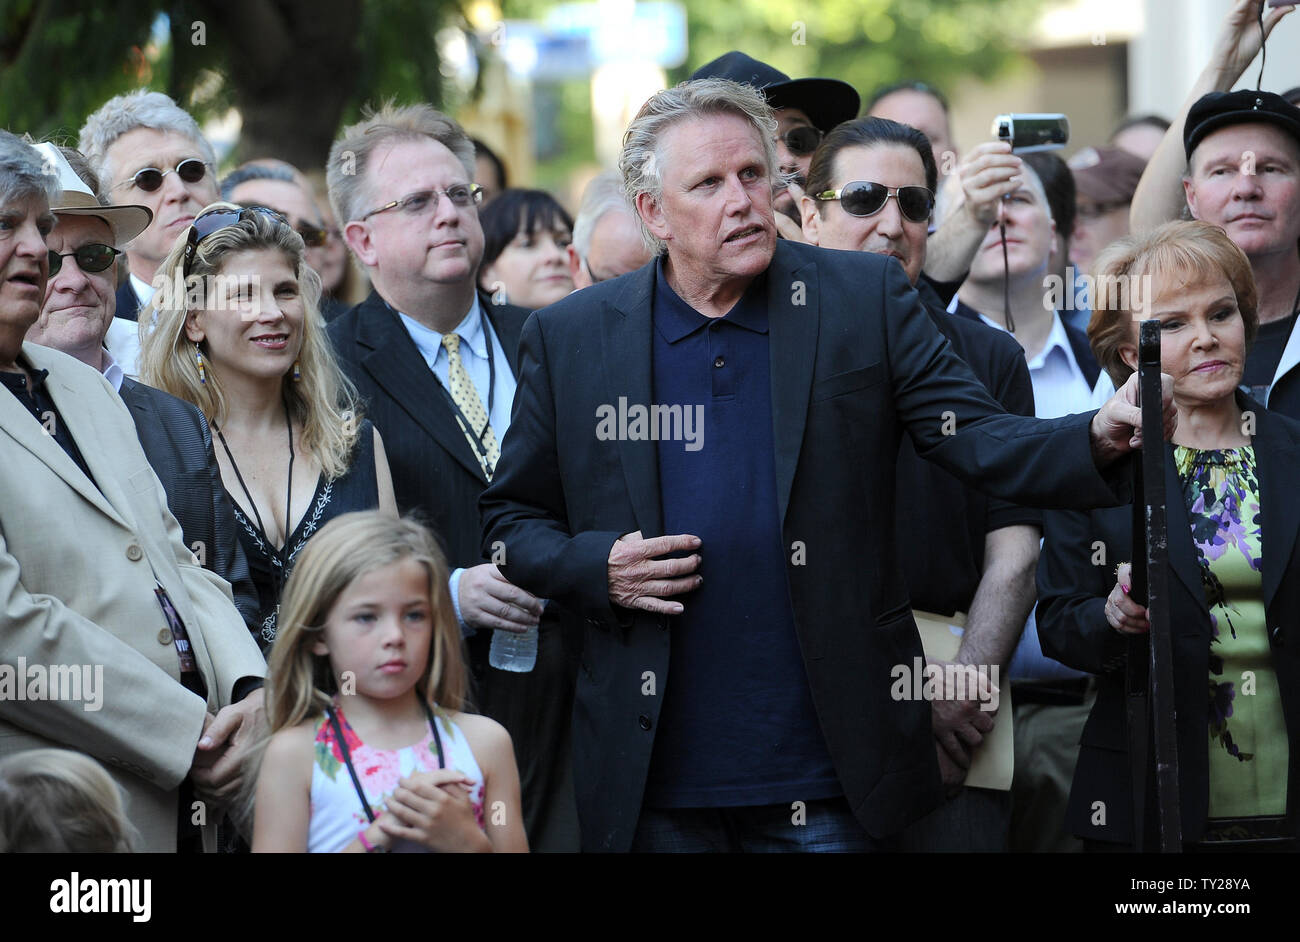 The late Buddy Holly received a posthumous star on Hollywood's Walk of Fame on his 75th birthday on Vine Street in front of The Capitol Records Building in Los Angeles on September 7, 2011. L-R; John Phil Everly, Stephanie and Gary Busey and Maria Elena Holly wait for their turn to speak at the event.  UPI/Jayne Kamin-Oncea Stock Photo